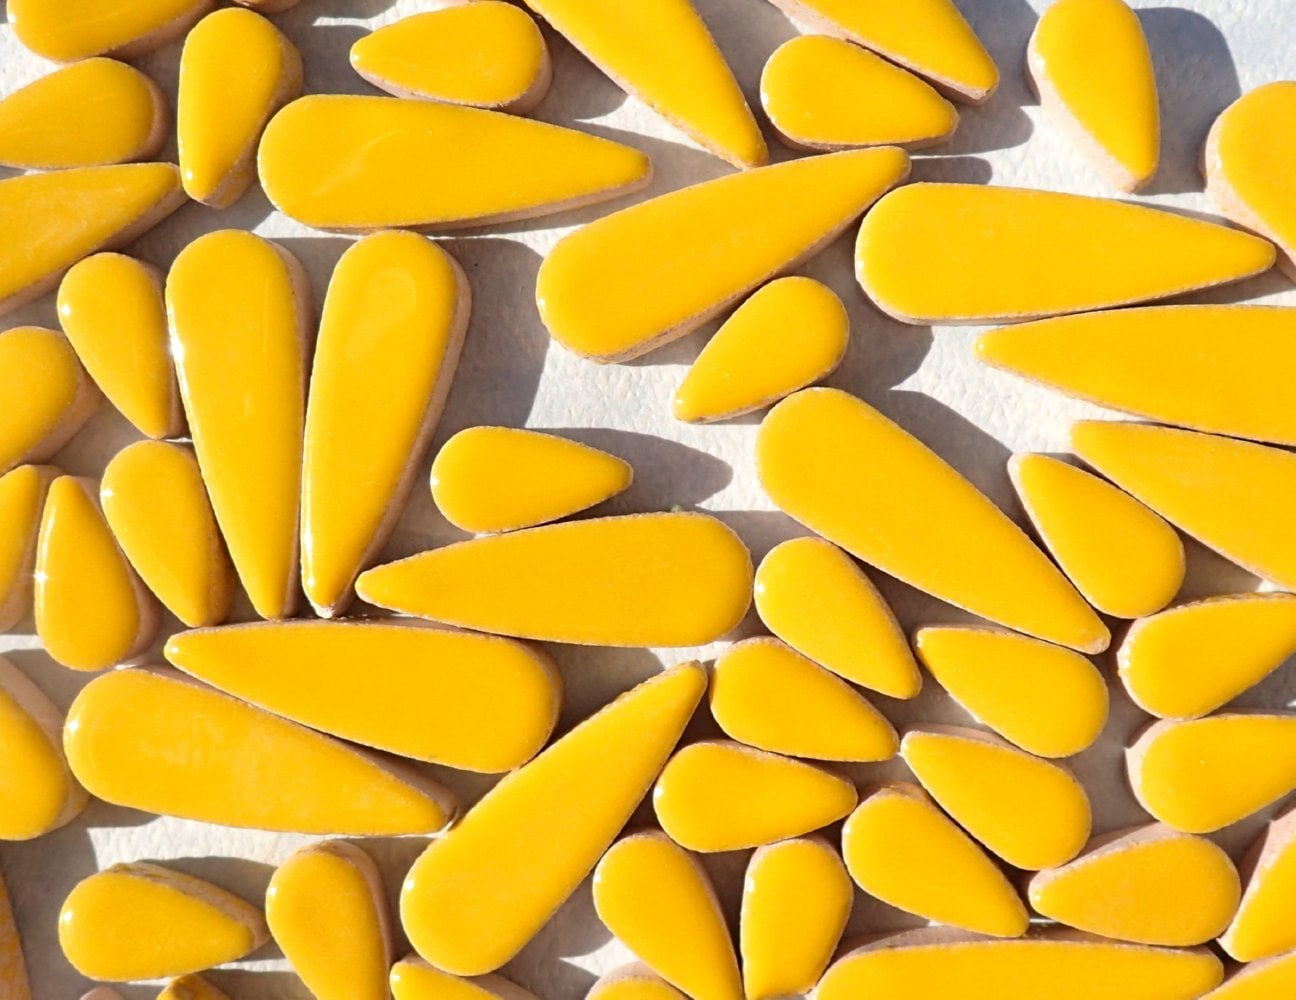 Lemon Yellow Teardrop Mosaic Tiles - 50g Ceramic Drops in Mix of 2 Sizes 1/2" and 3/5"